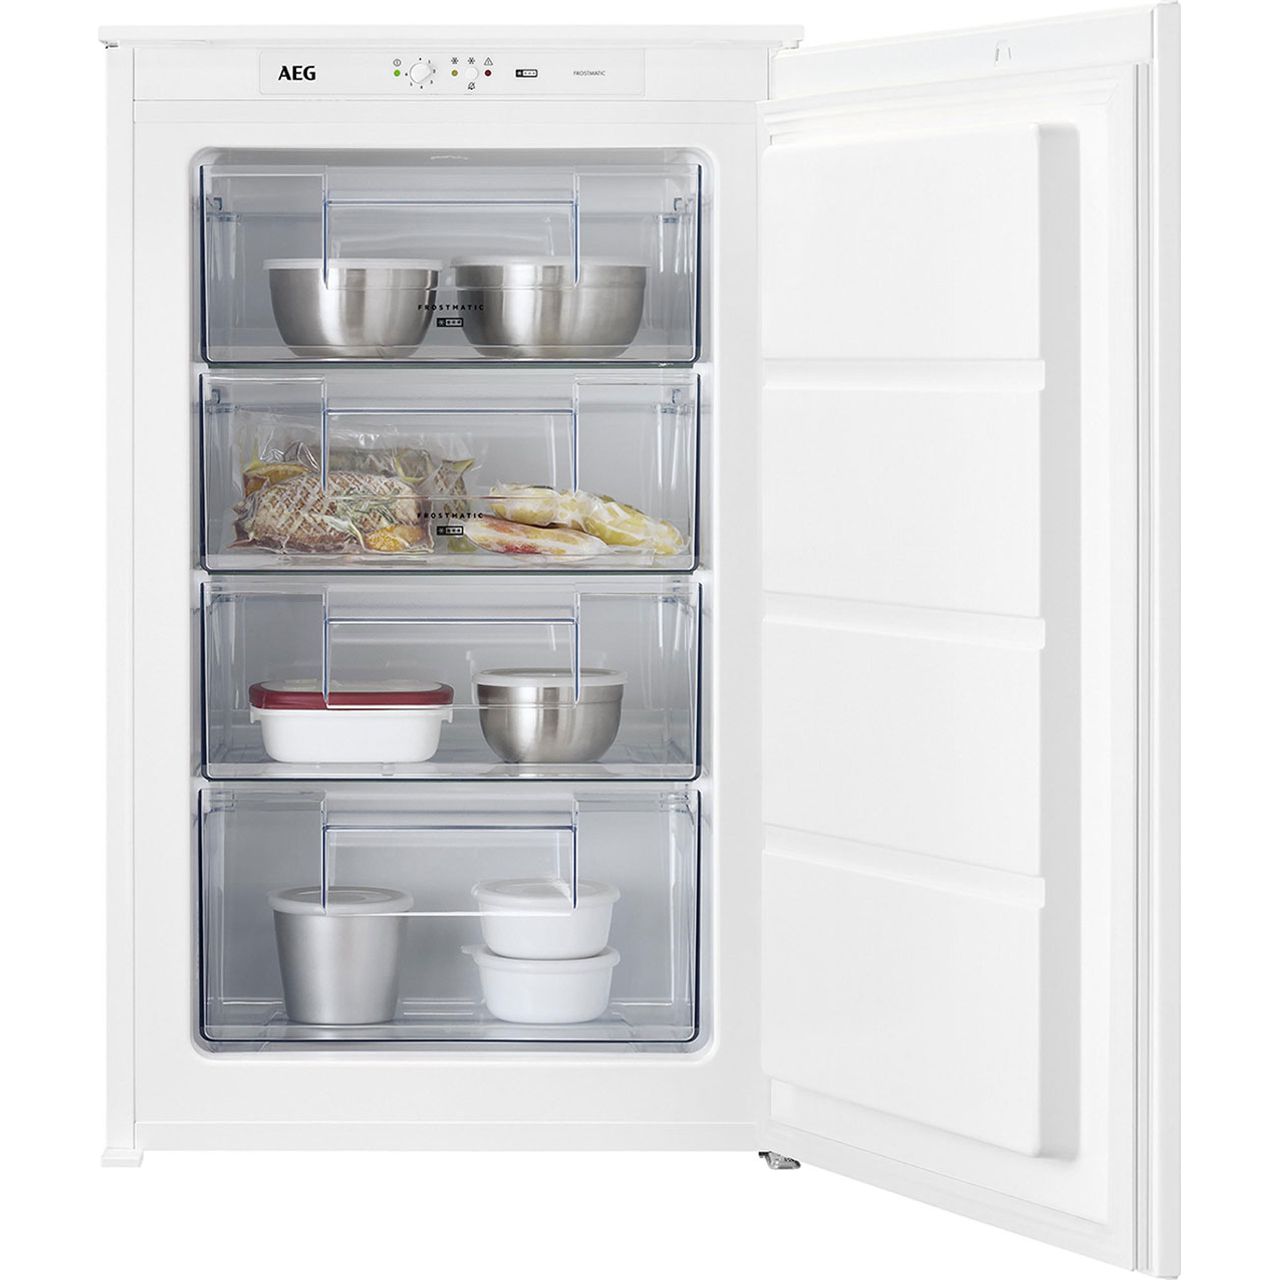 AEG ABE6882VLS Integrated Upright Freezer with Sliding Door Fixing Kit Review